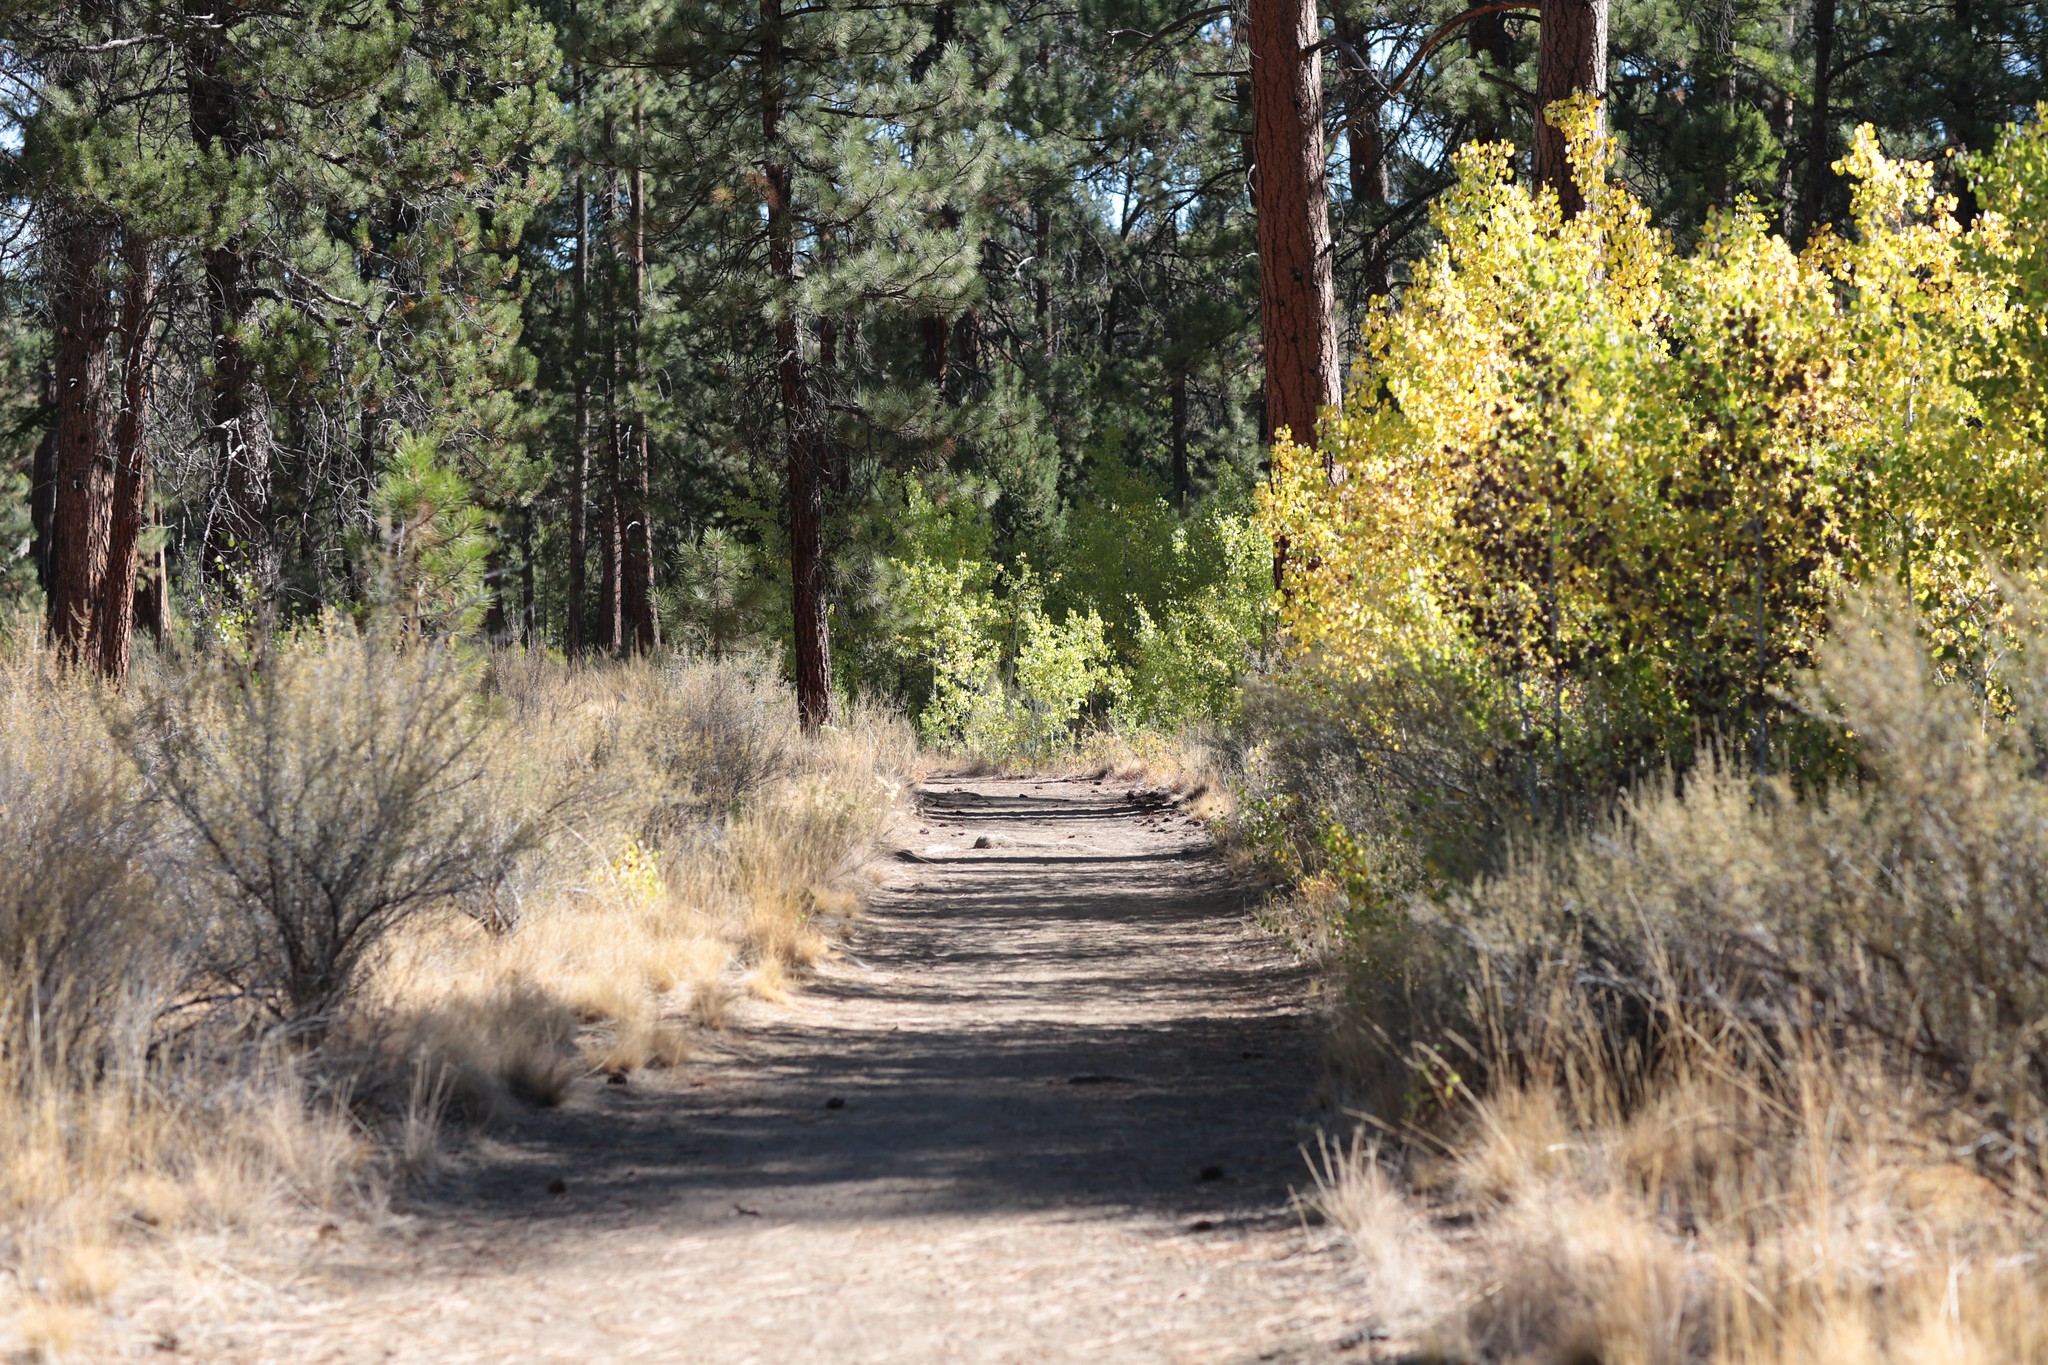 Shevlin Park Is The Perfect Spot In Bend To Relax And Soak Up Nature